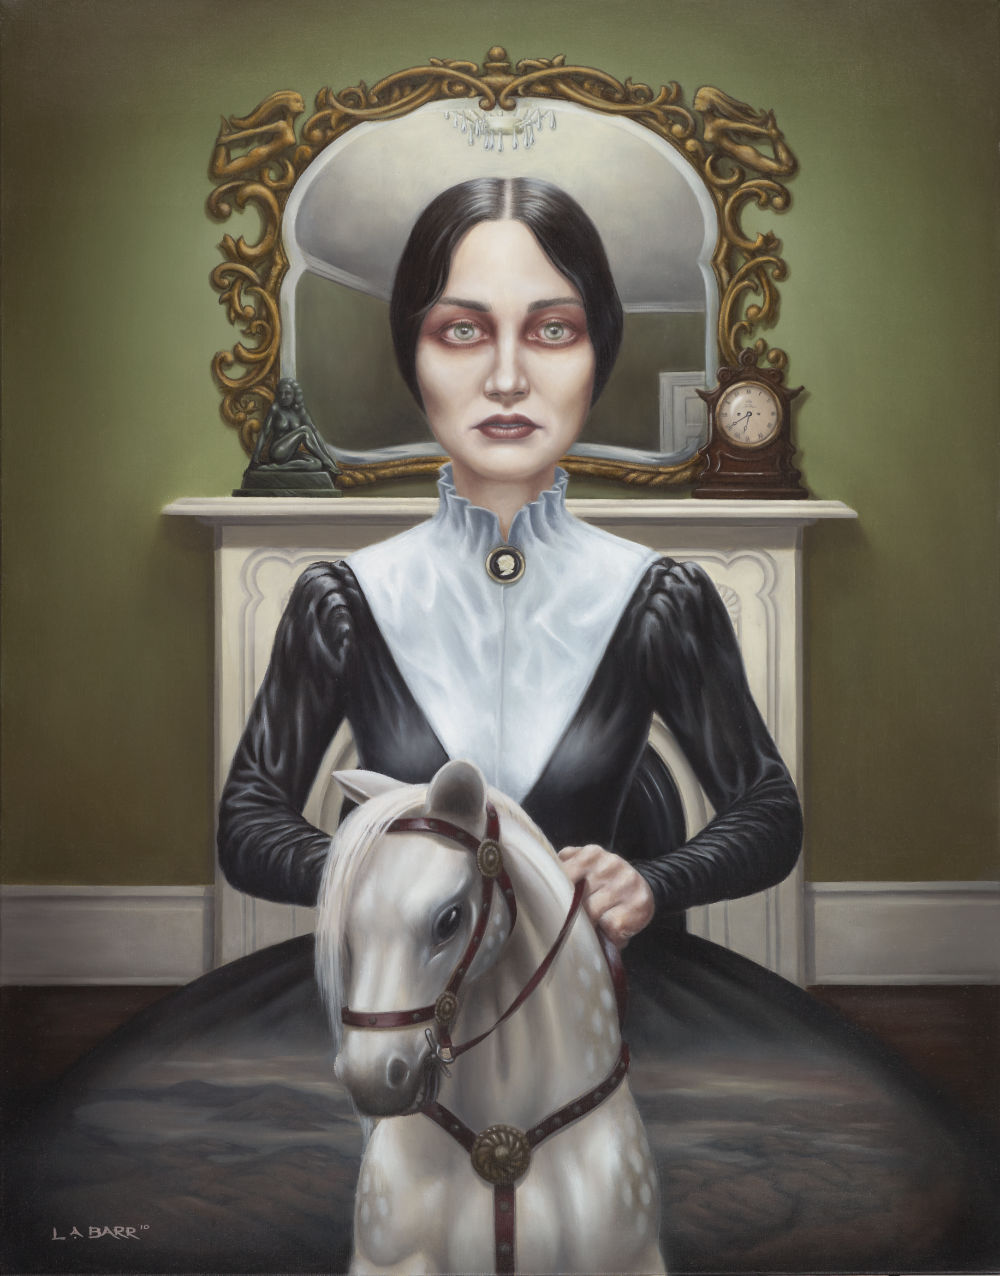 Woman astride a rockinghorse lament the loss of her youth, painting by Liam Barr